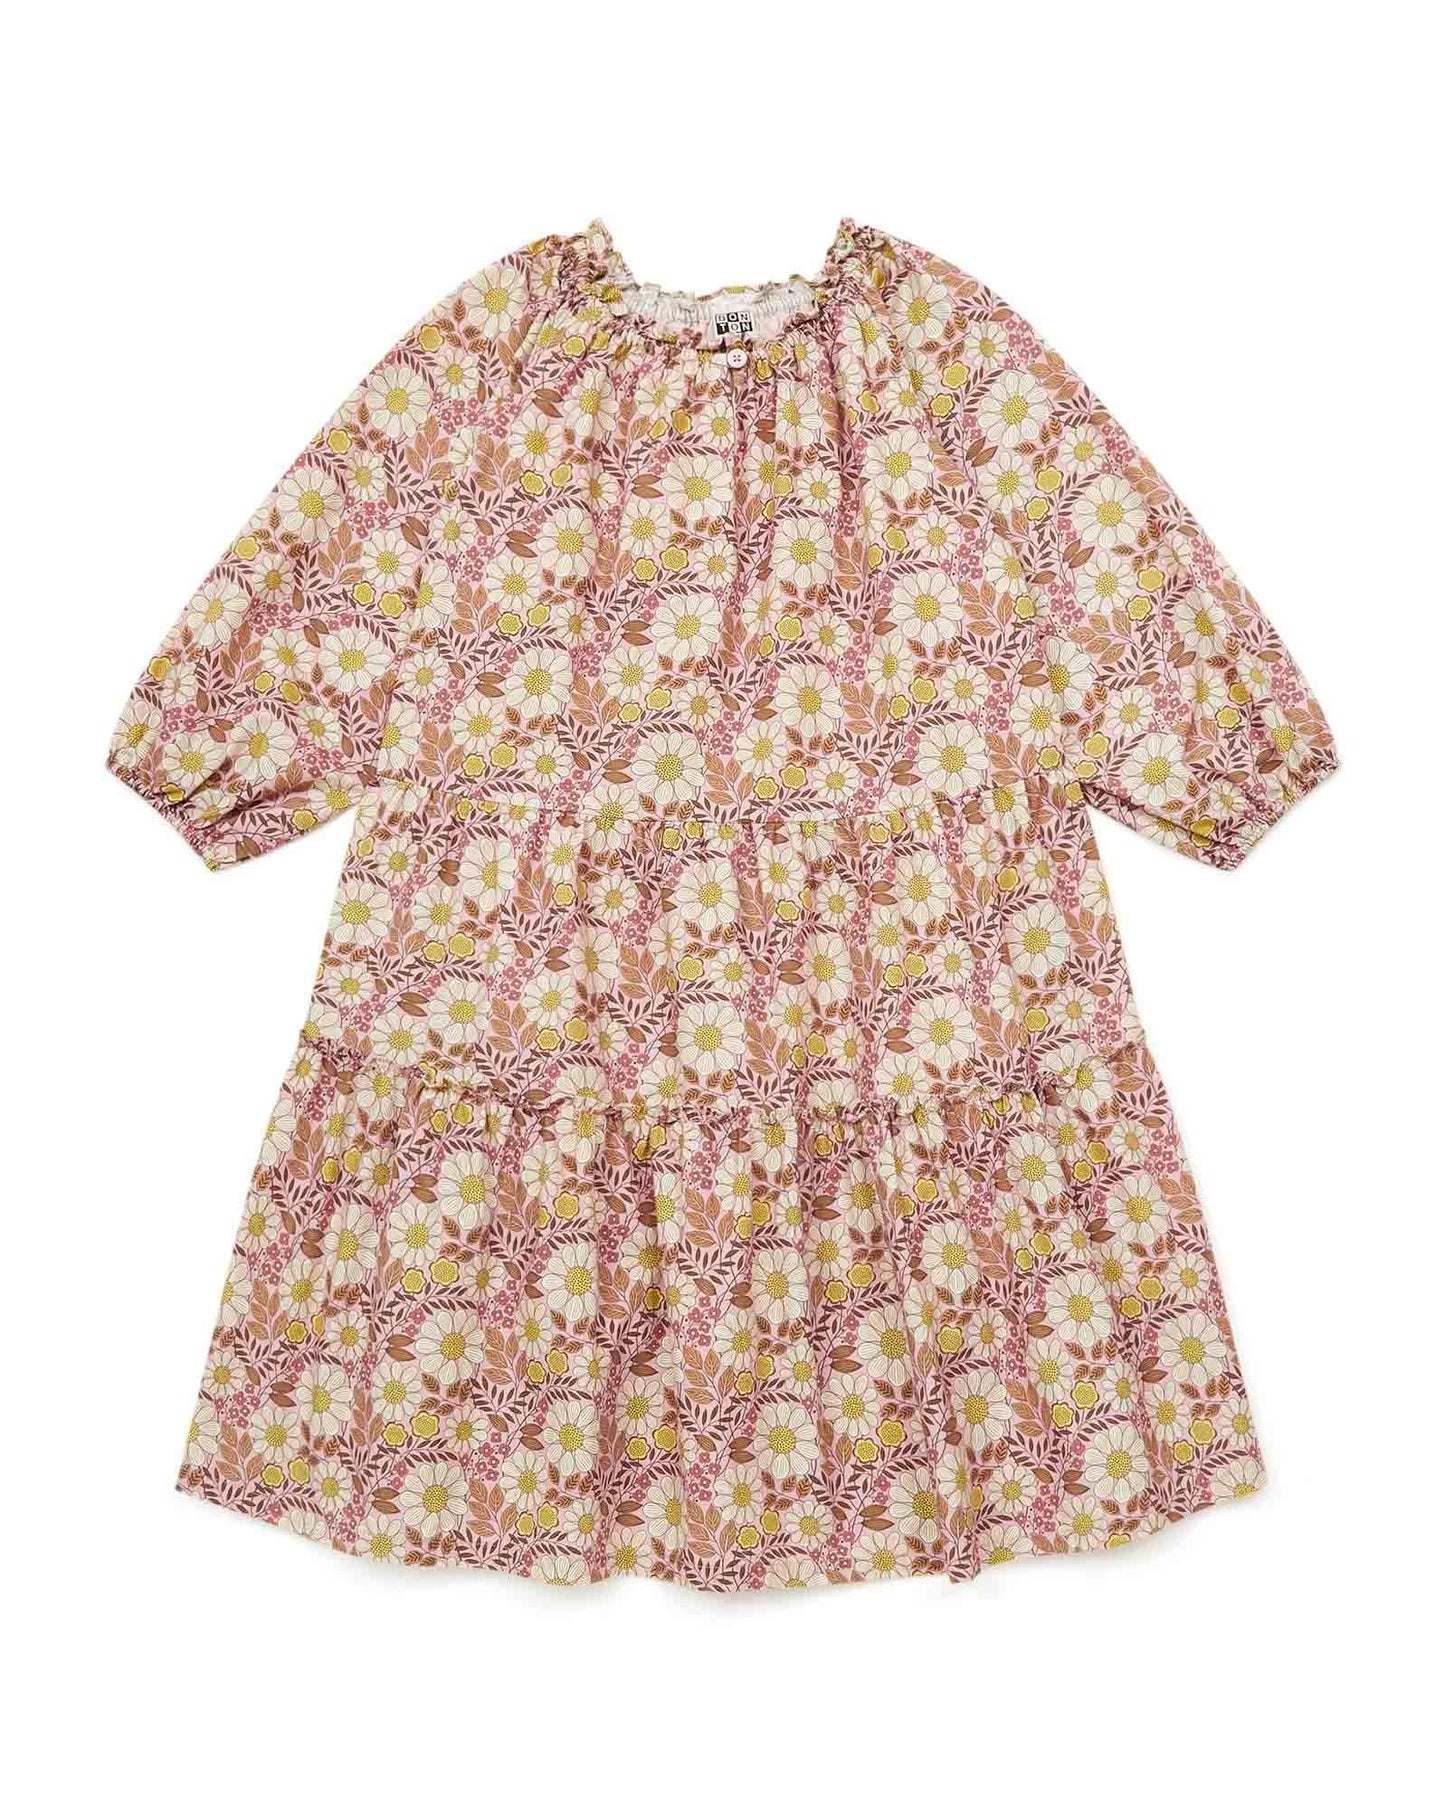 Dress - Félicie Pink in cotton Print Daisy flower